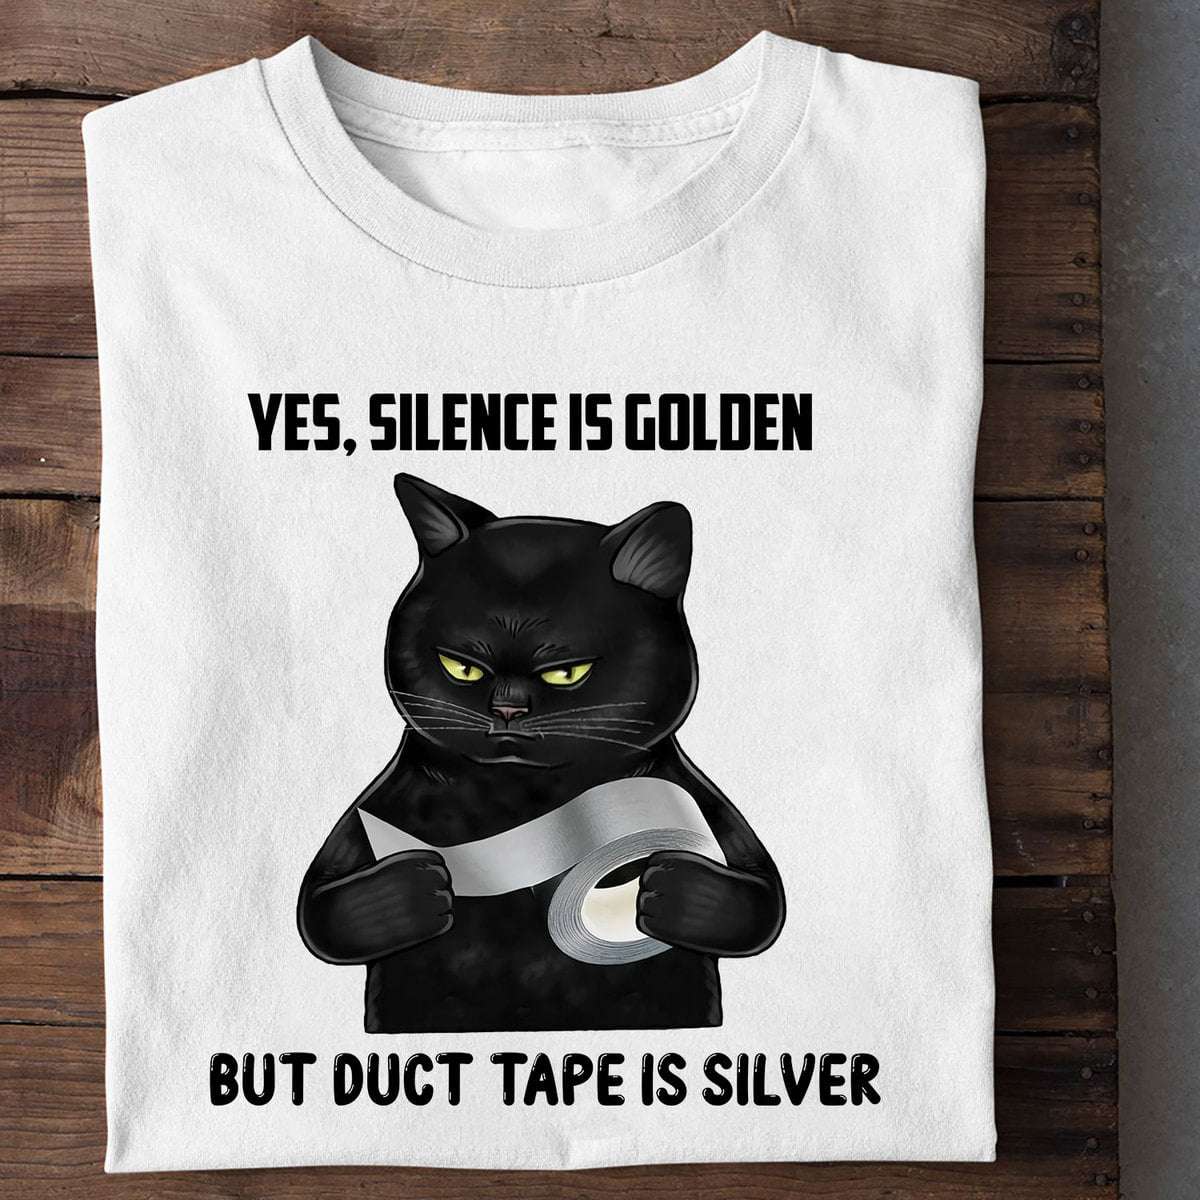 Duct Tape Black Cat - Yes silence is golden but duct tape is silver